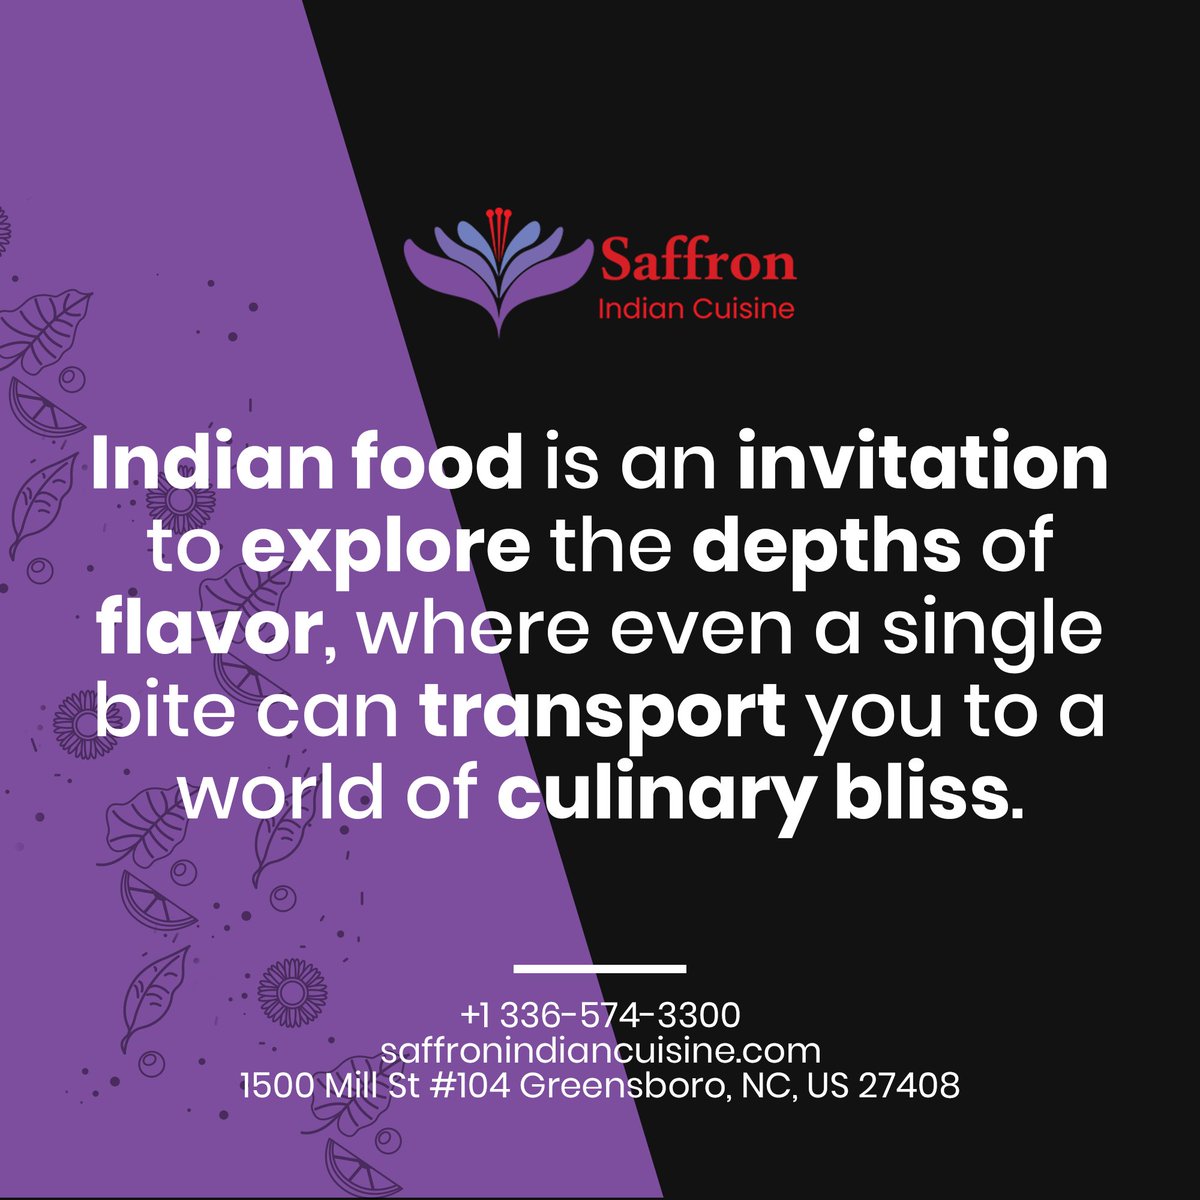 Delight in the refreshing zest of Saffron Indian Cuisine✨
.
#SaffronIndianCuisine #indianfood #indianfoodie #indianfoodlovers #winstonsalemfood #triadfood #hpufood #uncgfood #quotes #quote #quoteoftheday #foodquote